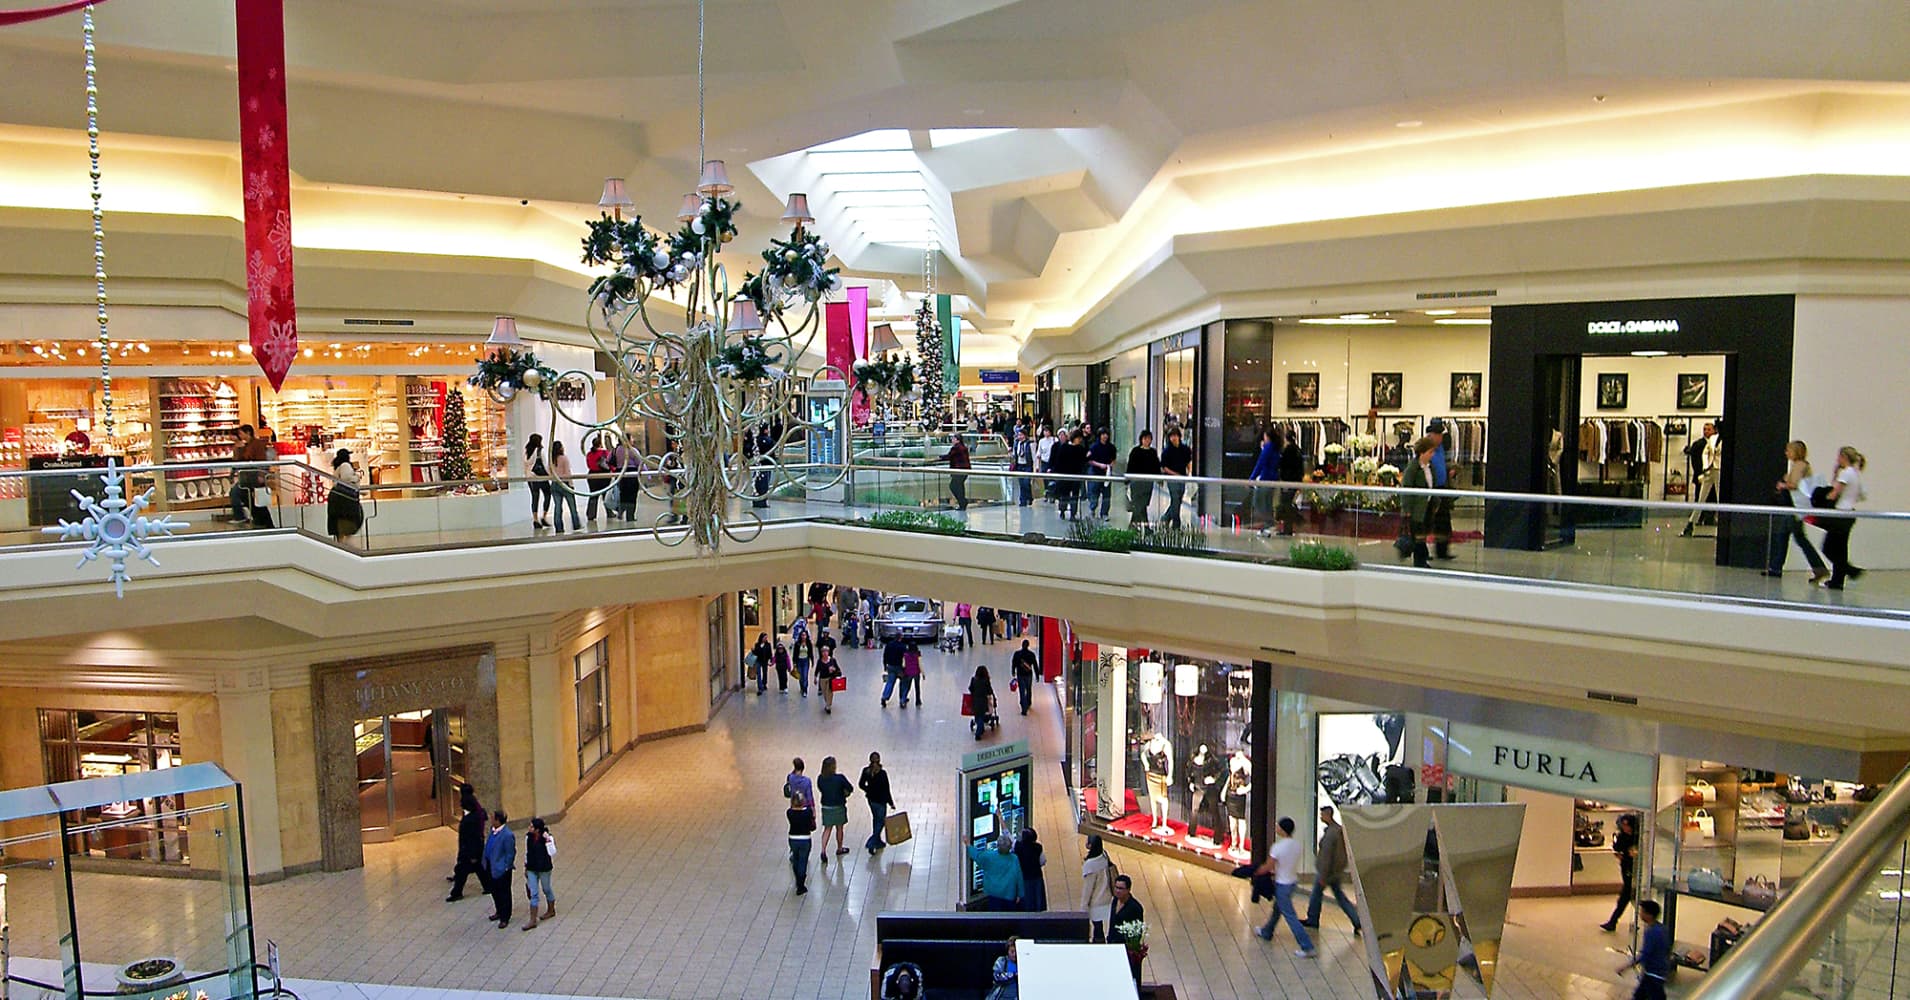 Mall security tight, but not 100%: Taubman Centers